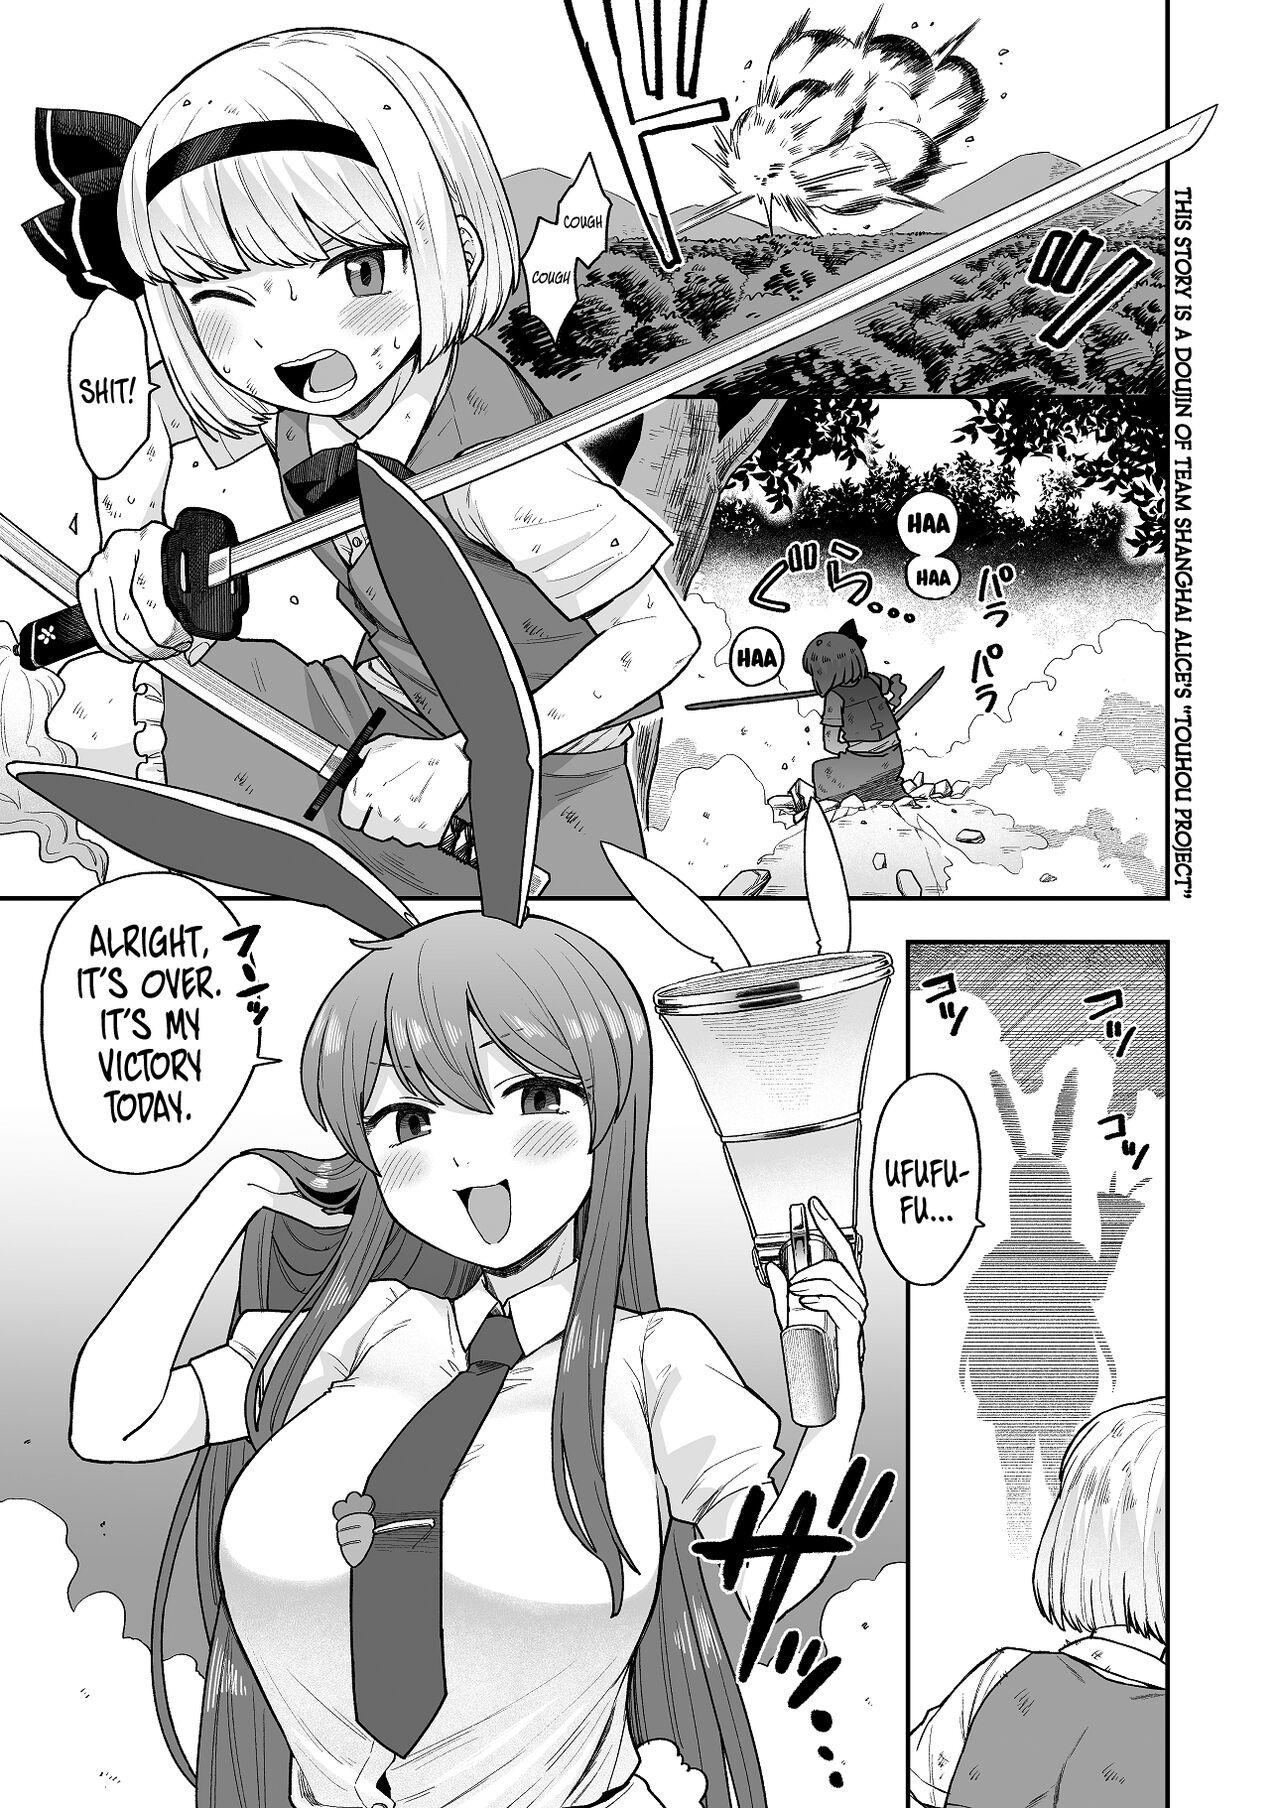 Cunt Ofuro ni Hairou! | Let's Take a Bath! - Touhou project Soapy Massage - Page 1